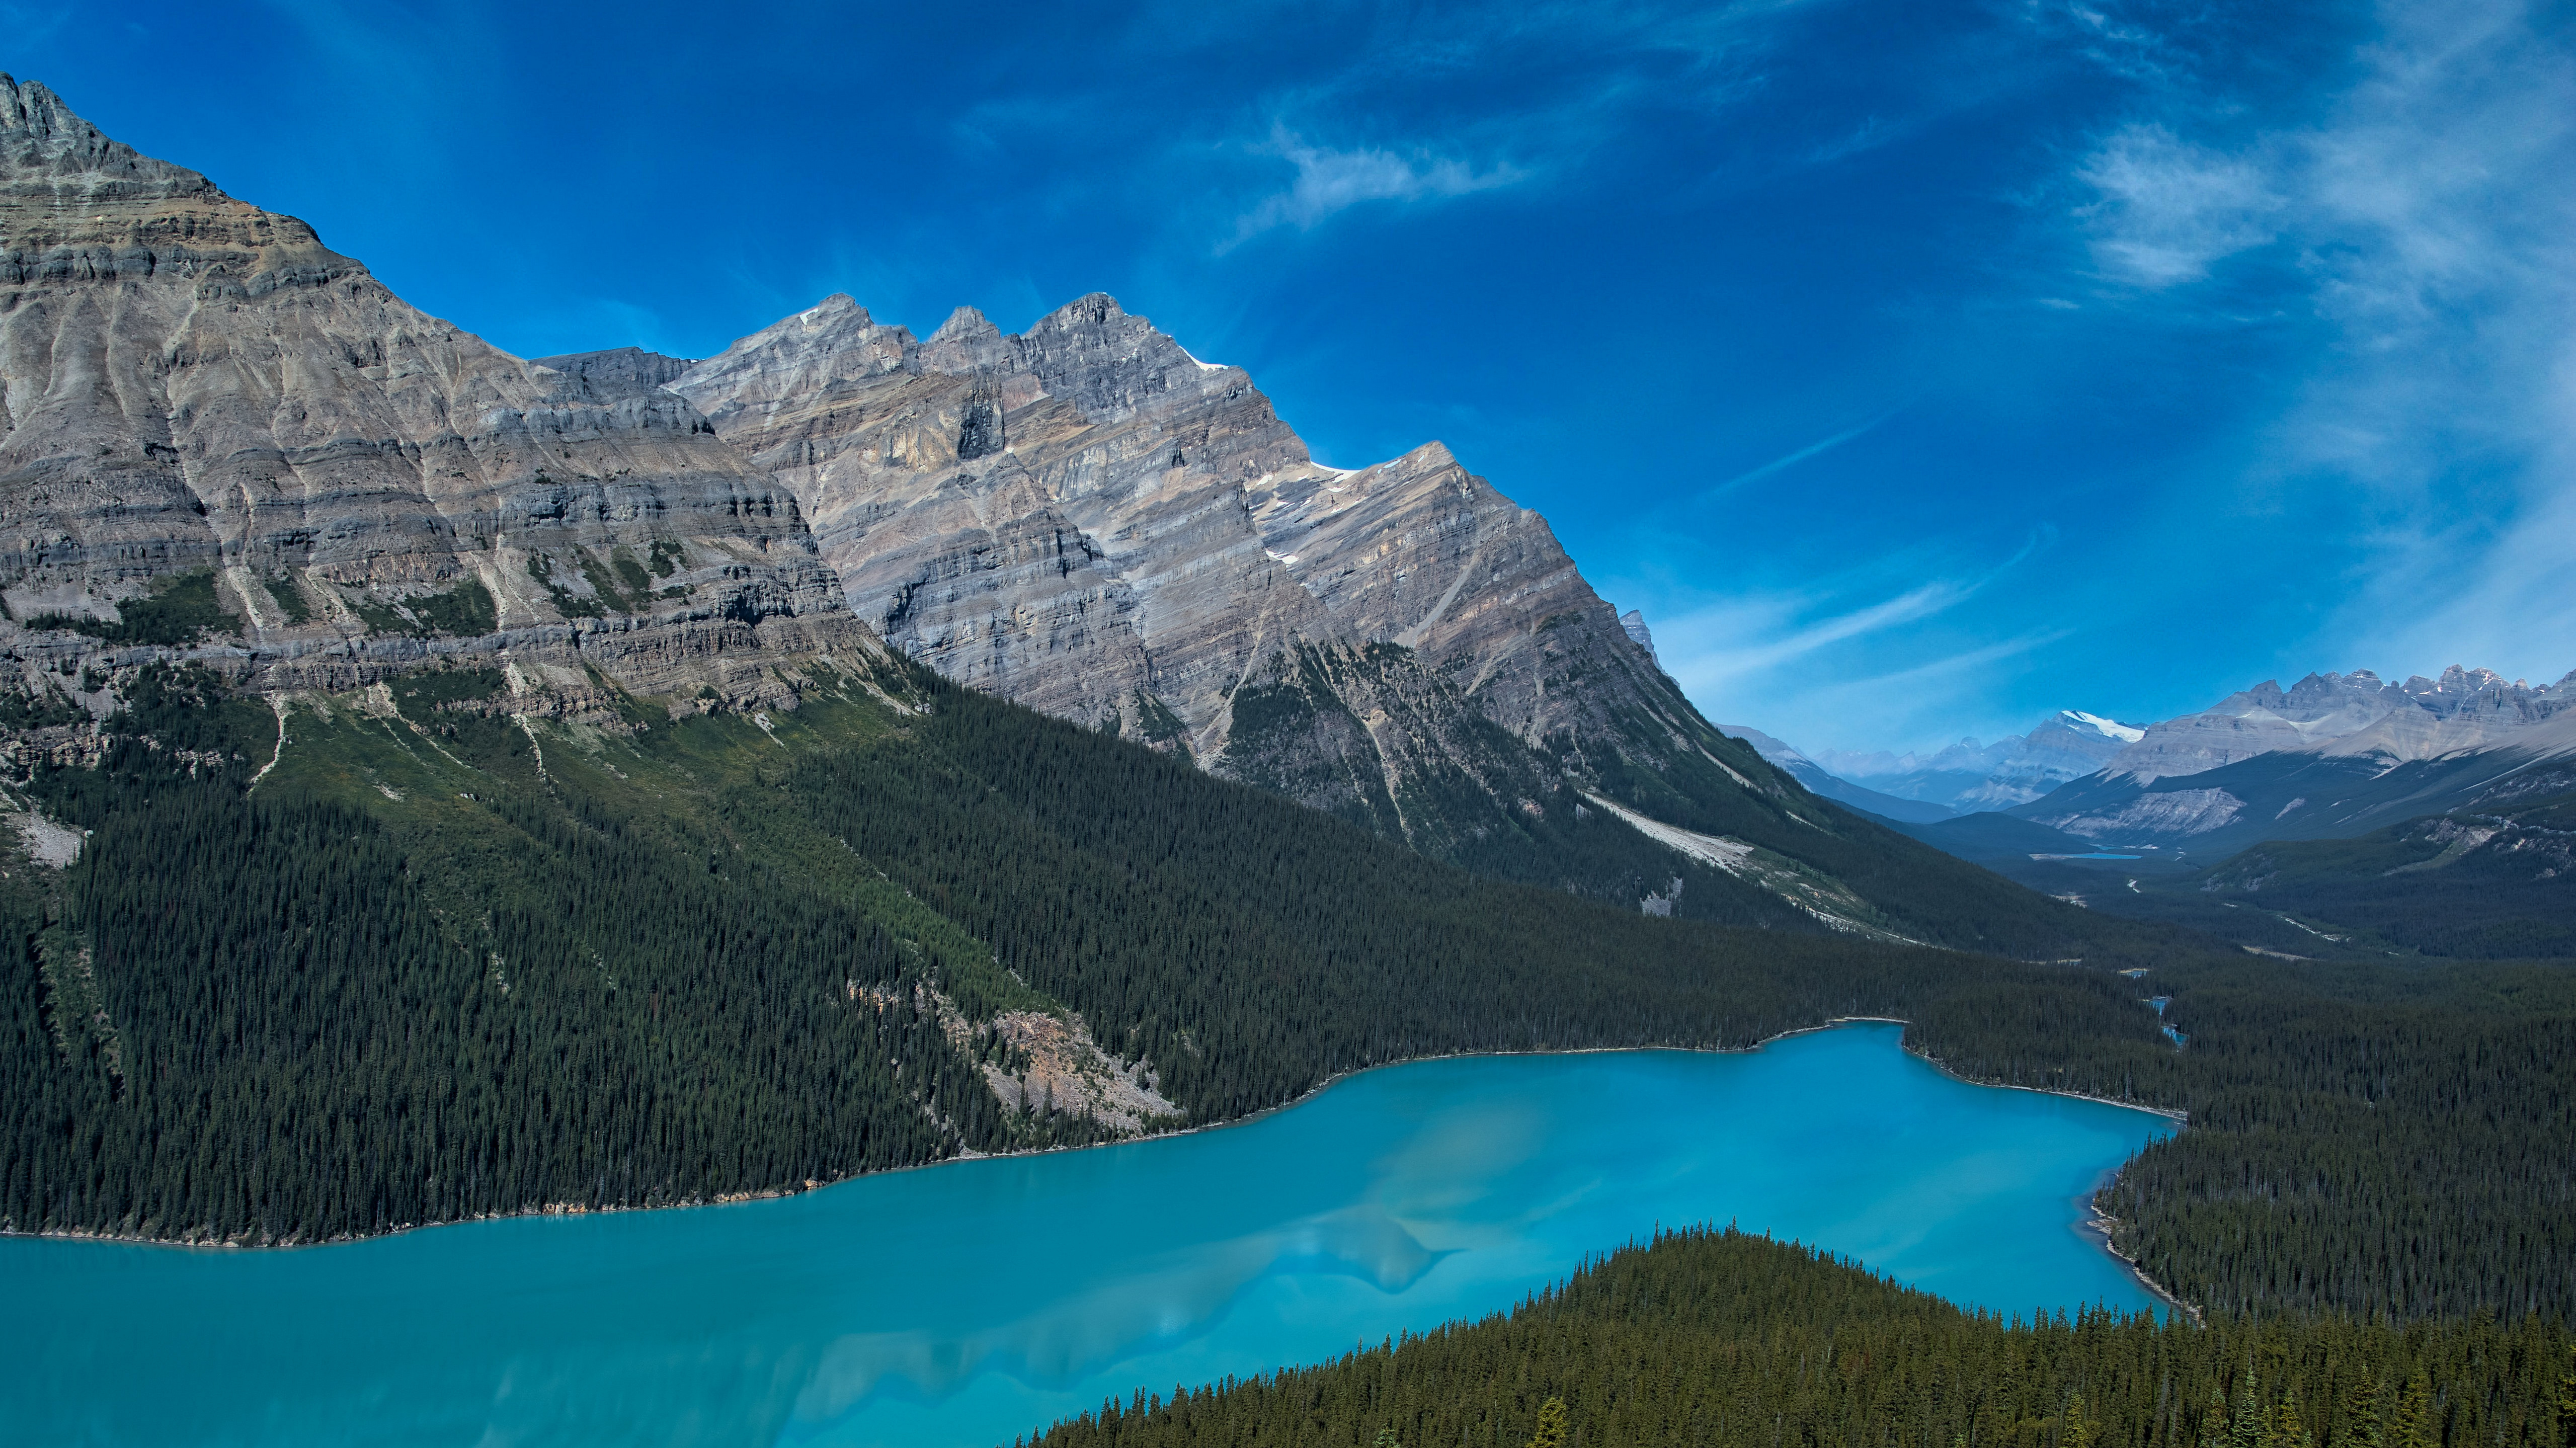 Banff 4K wallpapers for your desktop or mobile screen free and easy to  download